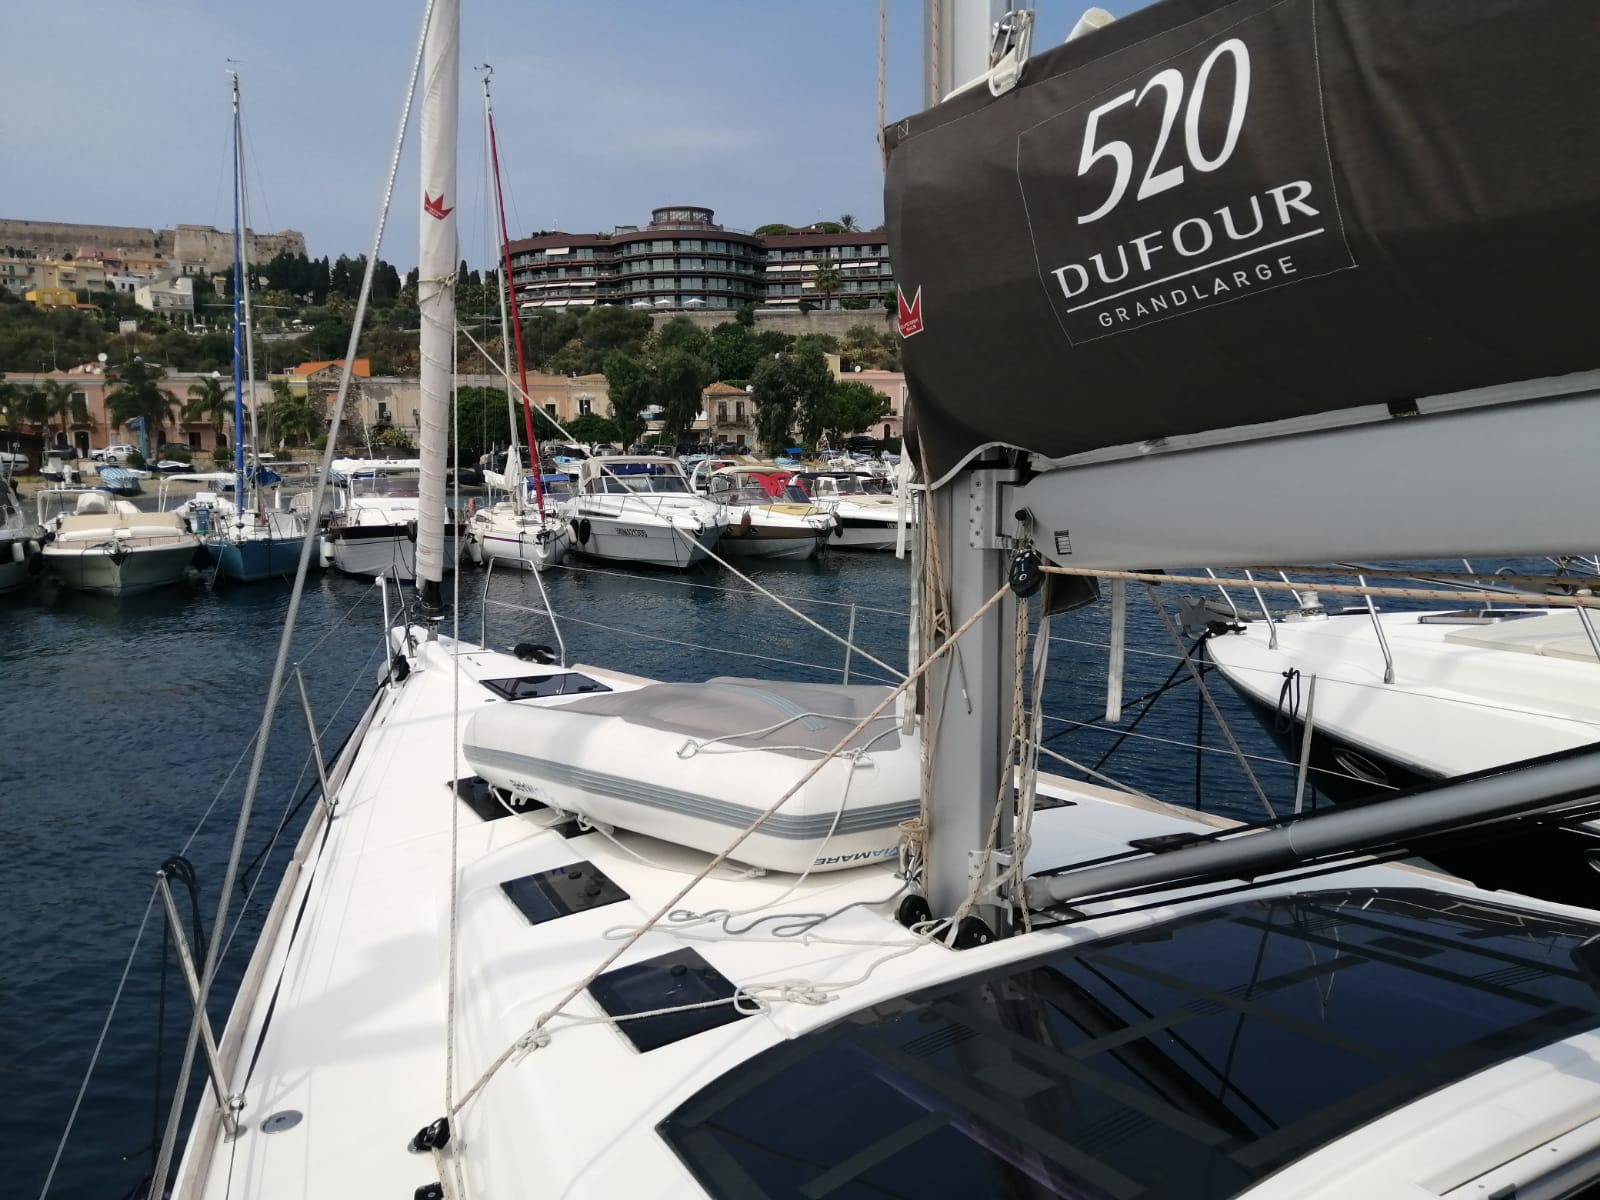 Dufour 520 Grand Large